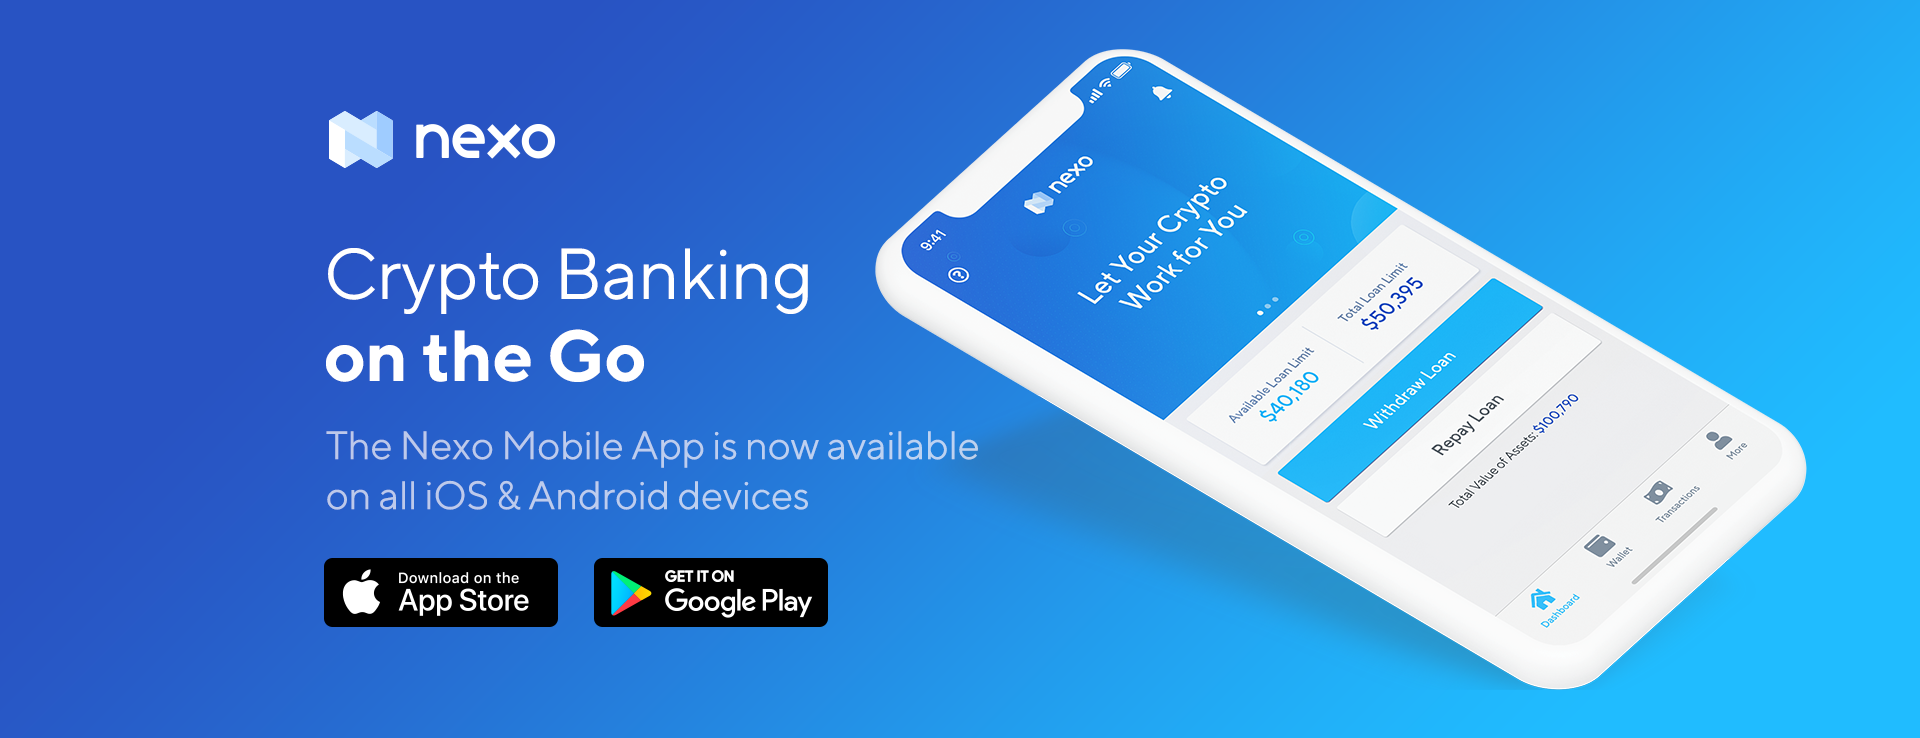 The Nexo App Now Available on iOS & Android